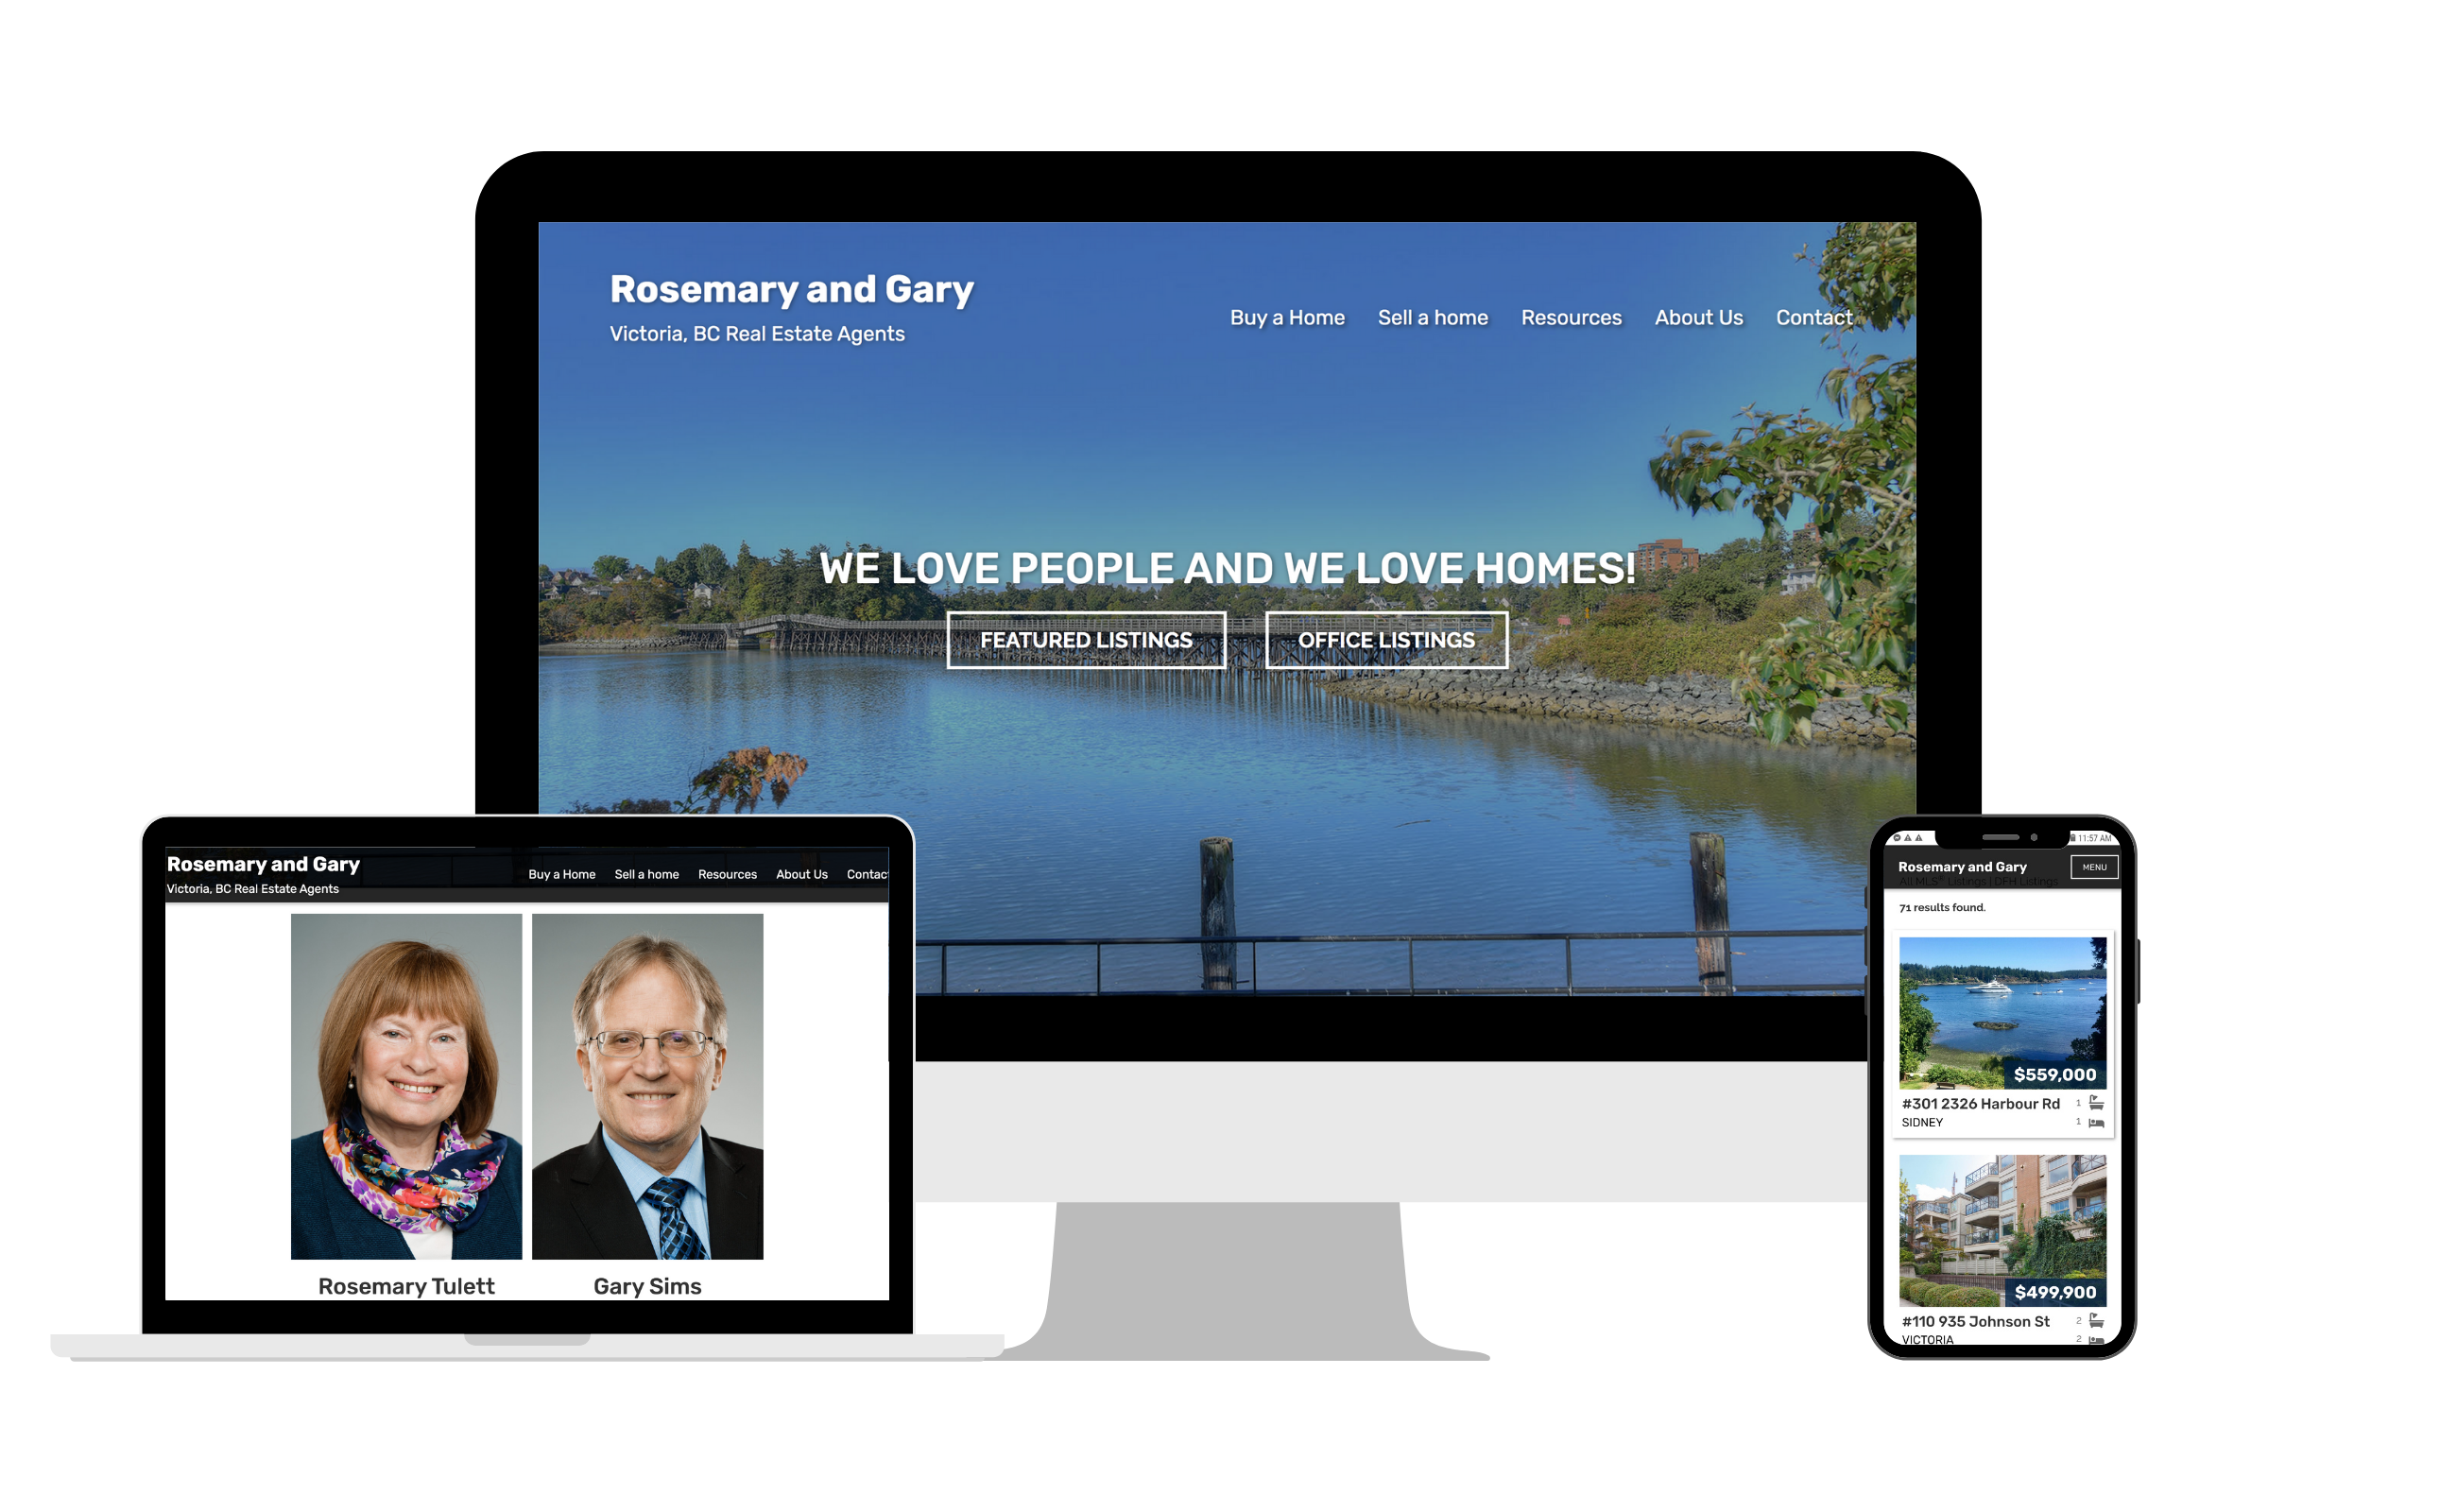 tulett and sims real estate website mockup by amt marketing